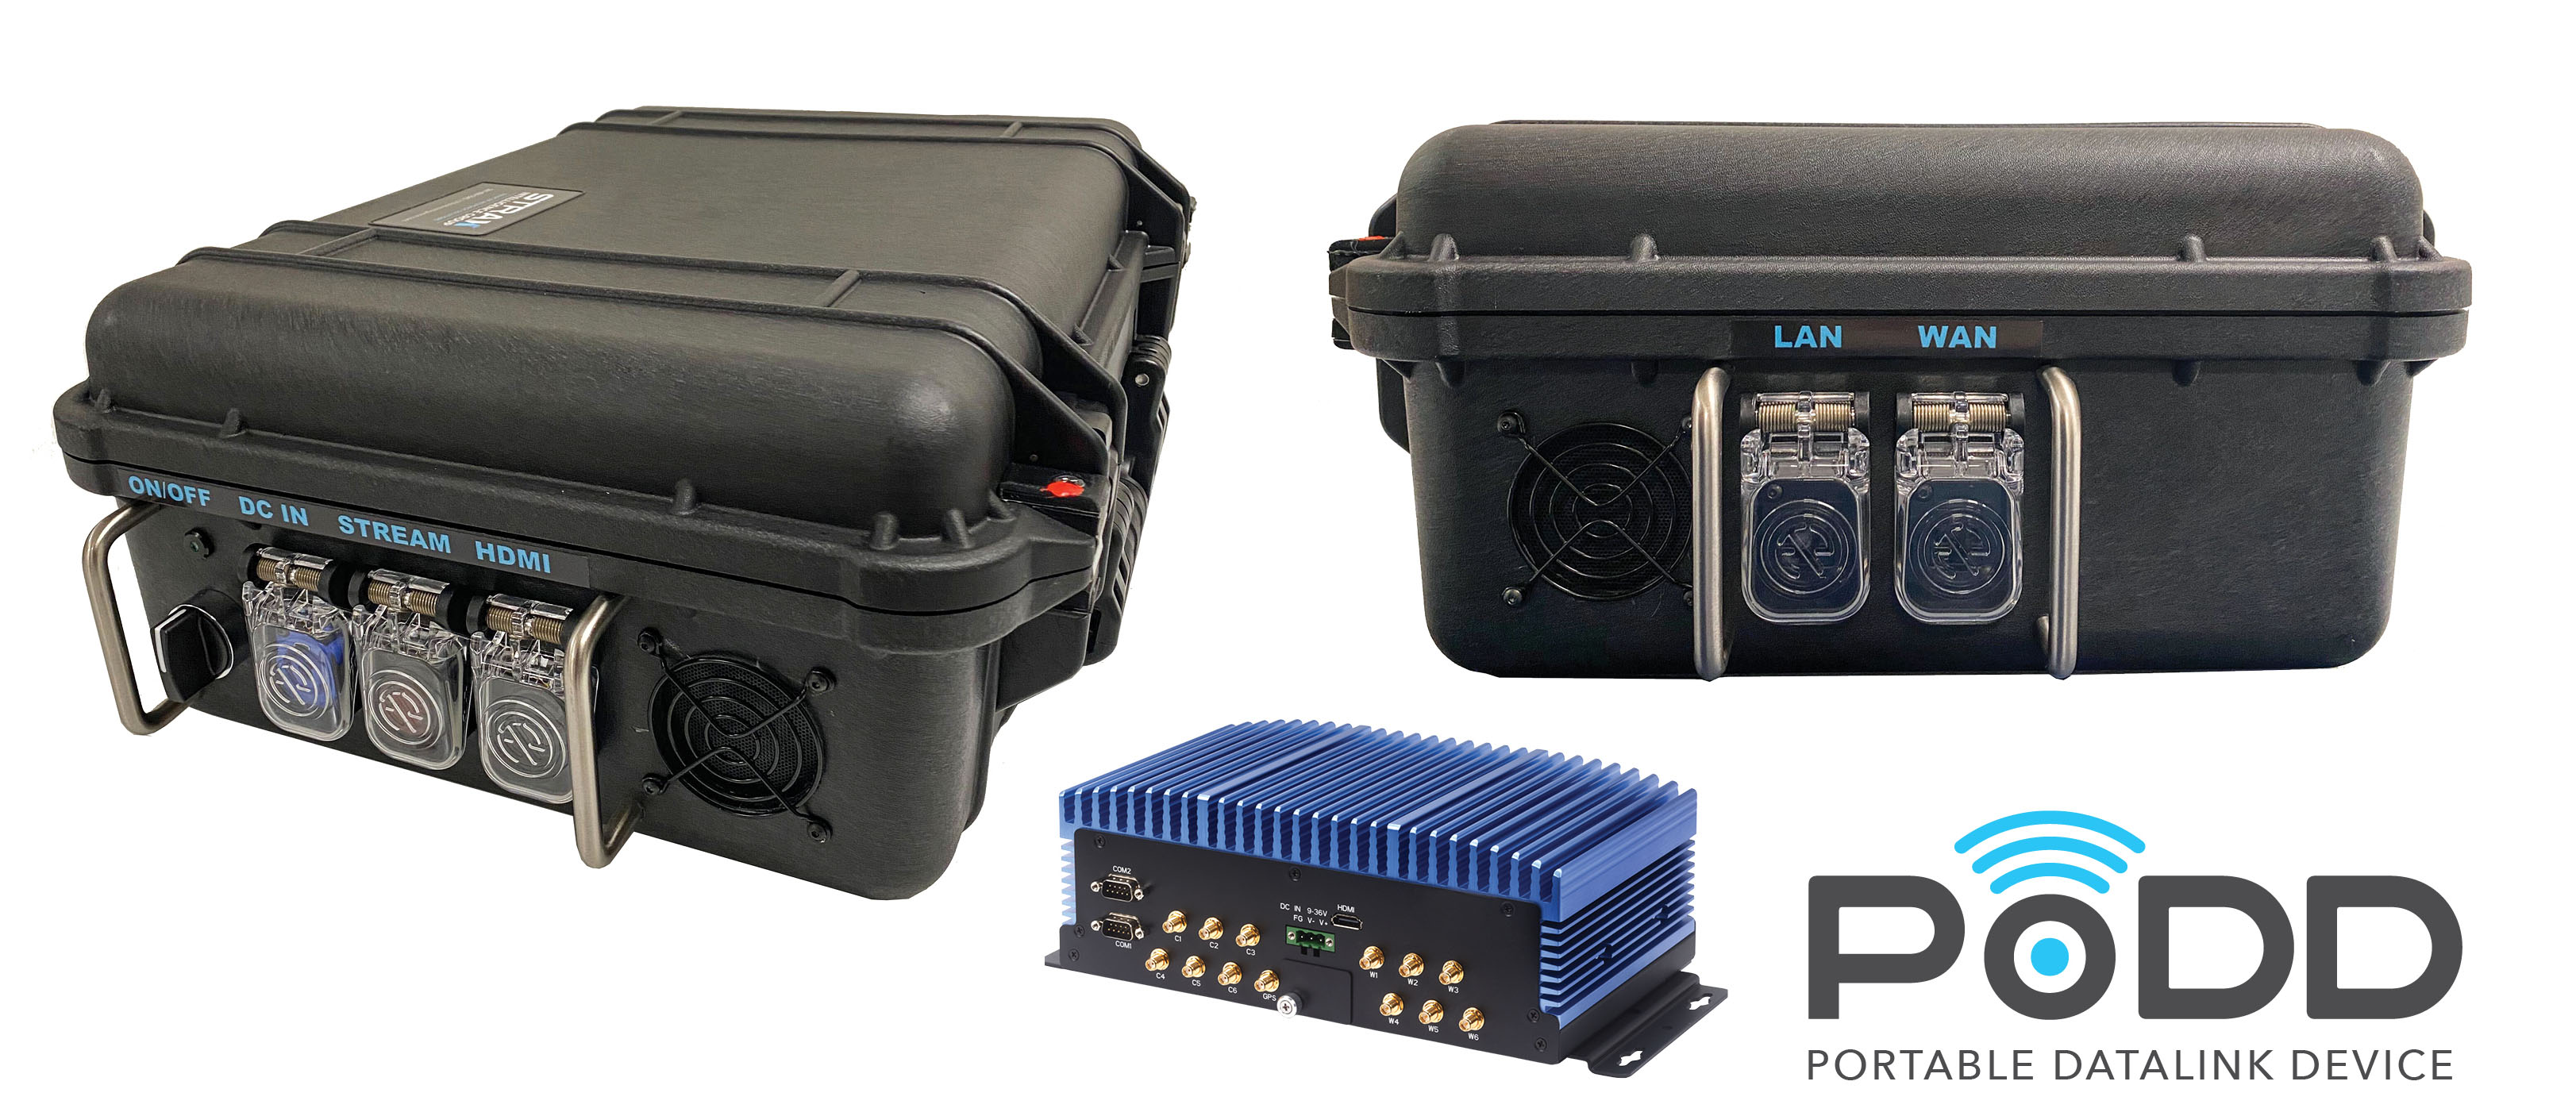 STRAX Intelligence Group partners with Dejero to create rugged Portable Datalink Device to ensure connectivity in the field